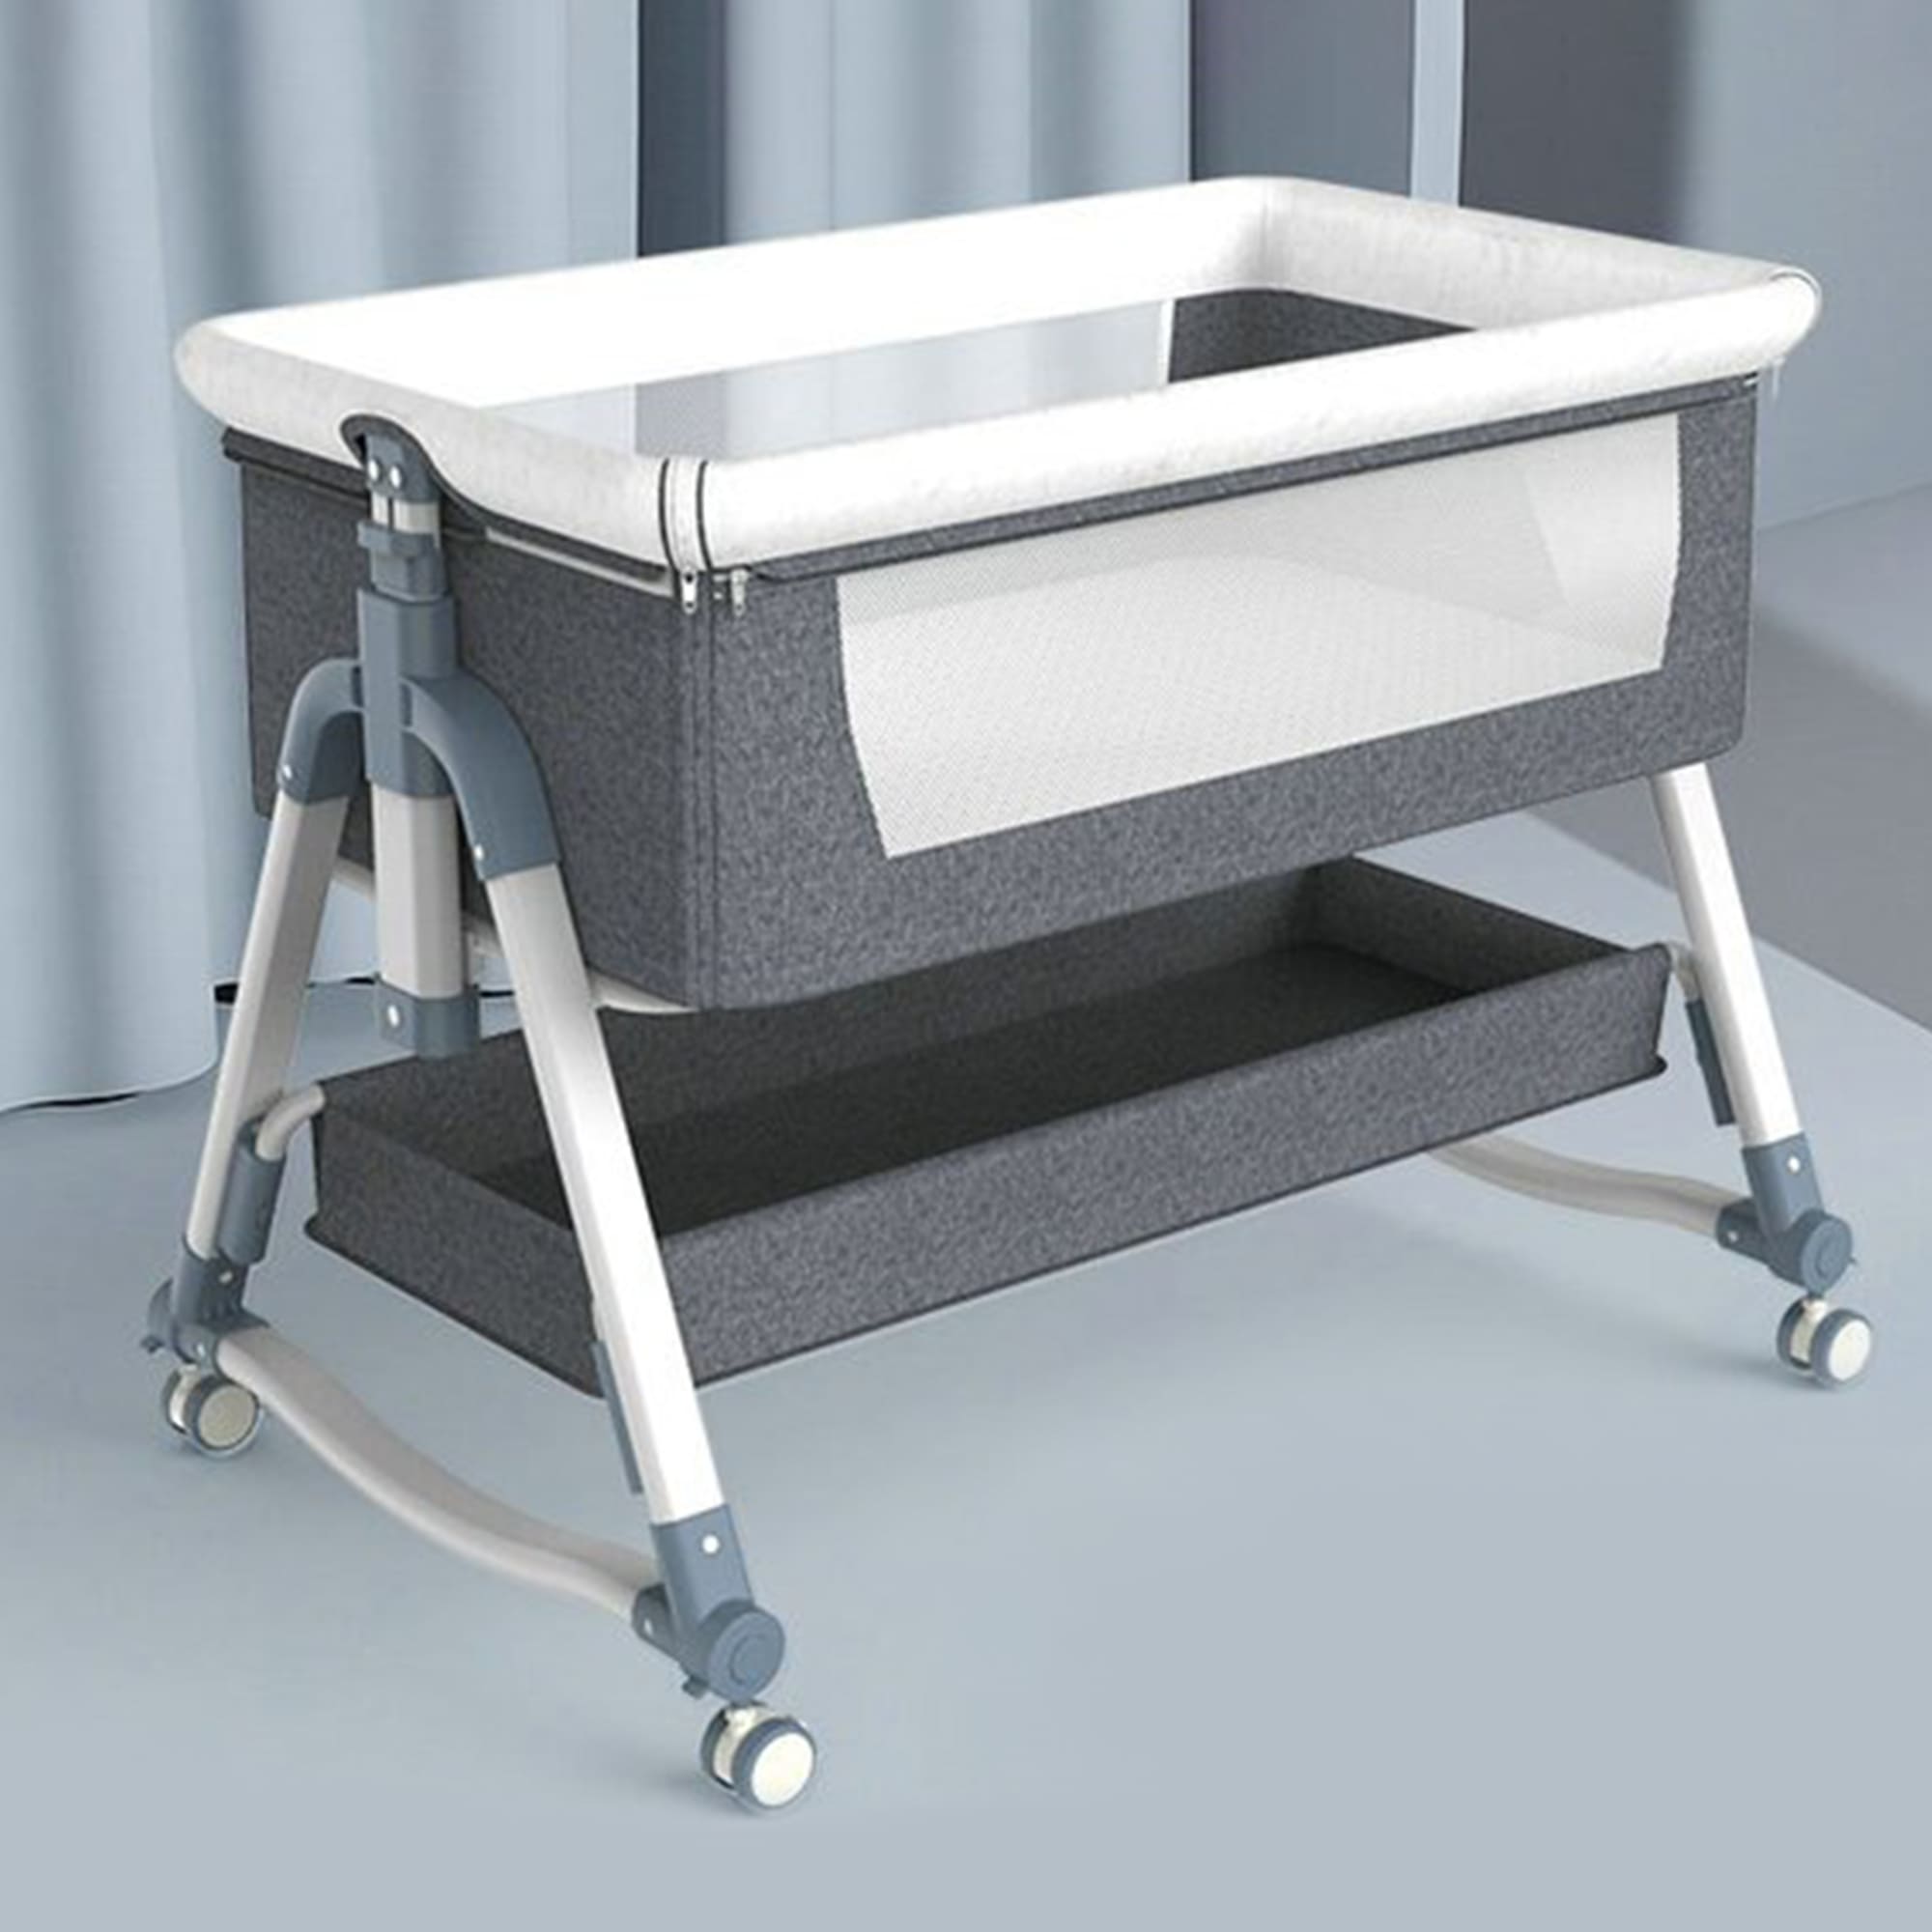 StarAndDaisy Pluto Luxury Baby Crib with Height Adjustment and Next to bed Setup - With Soft Foam Mattress ,Storage basket Mosquito Net and Carry Bag (Grey)